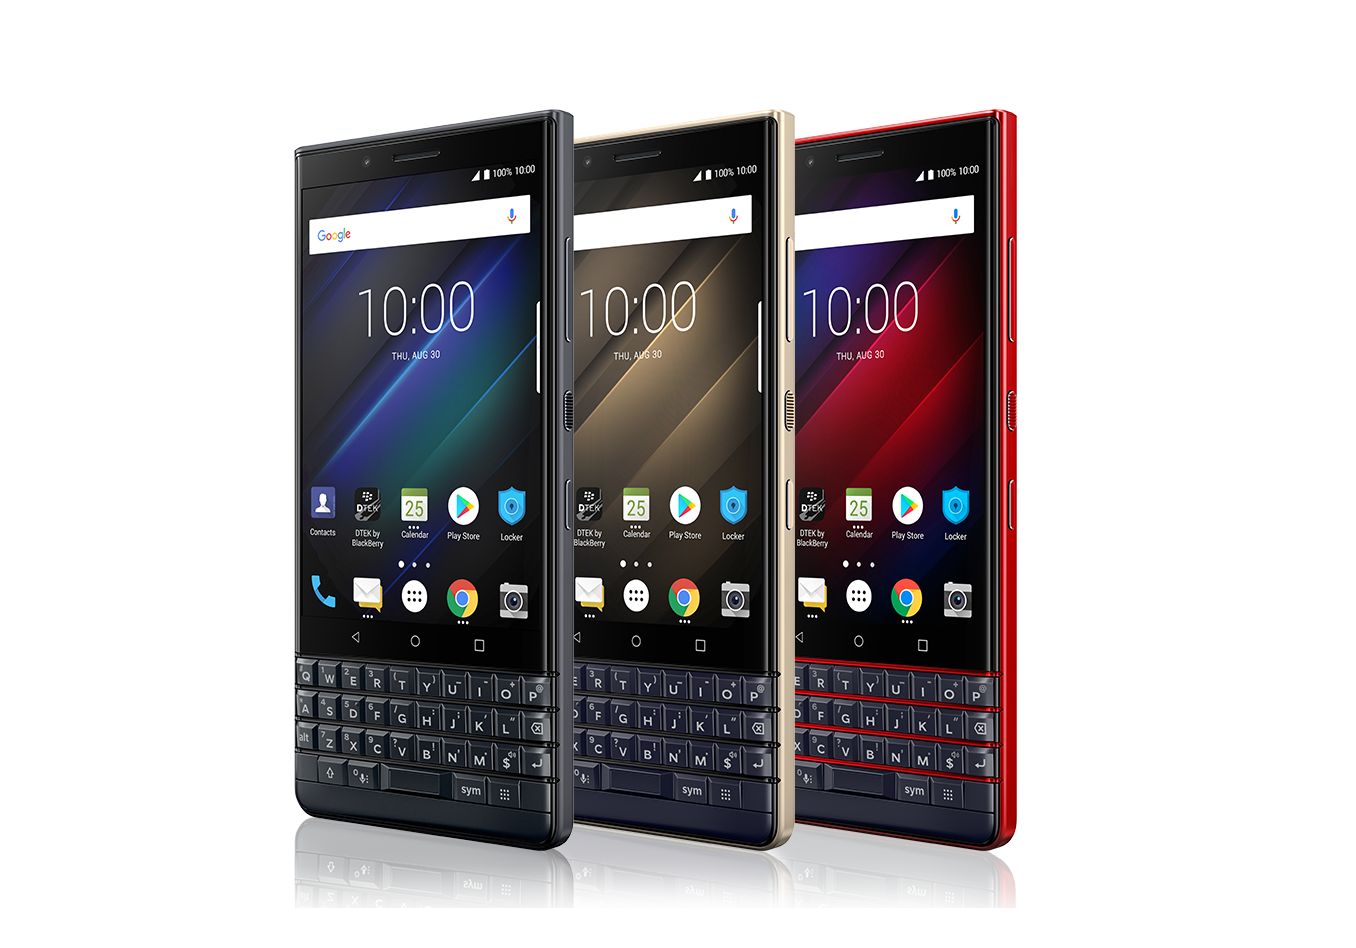 Qualcomm Snapdragon 636-powered BlackBerry KEY2 LE now available for